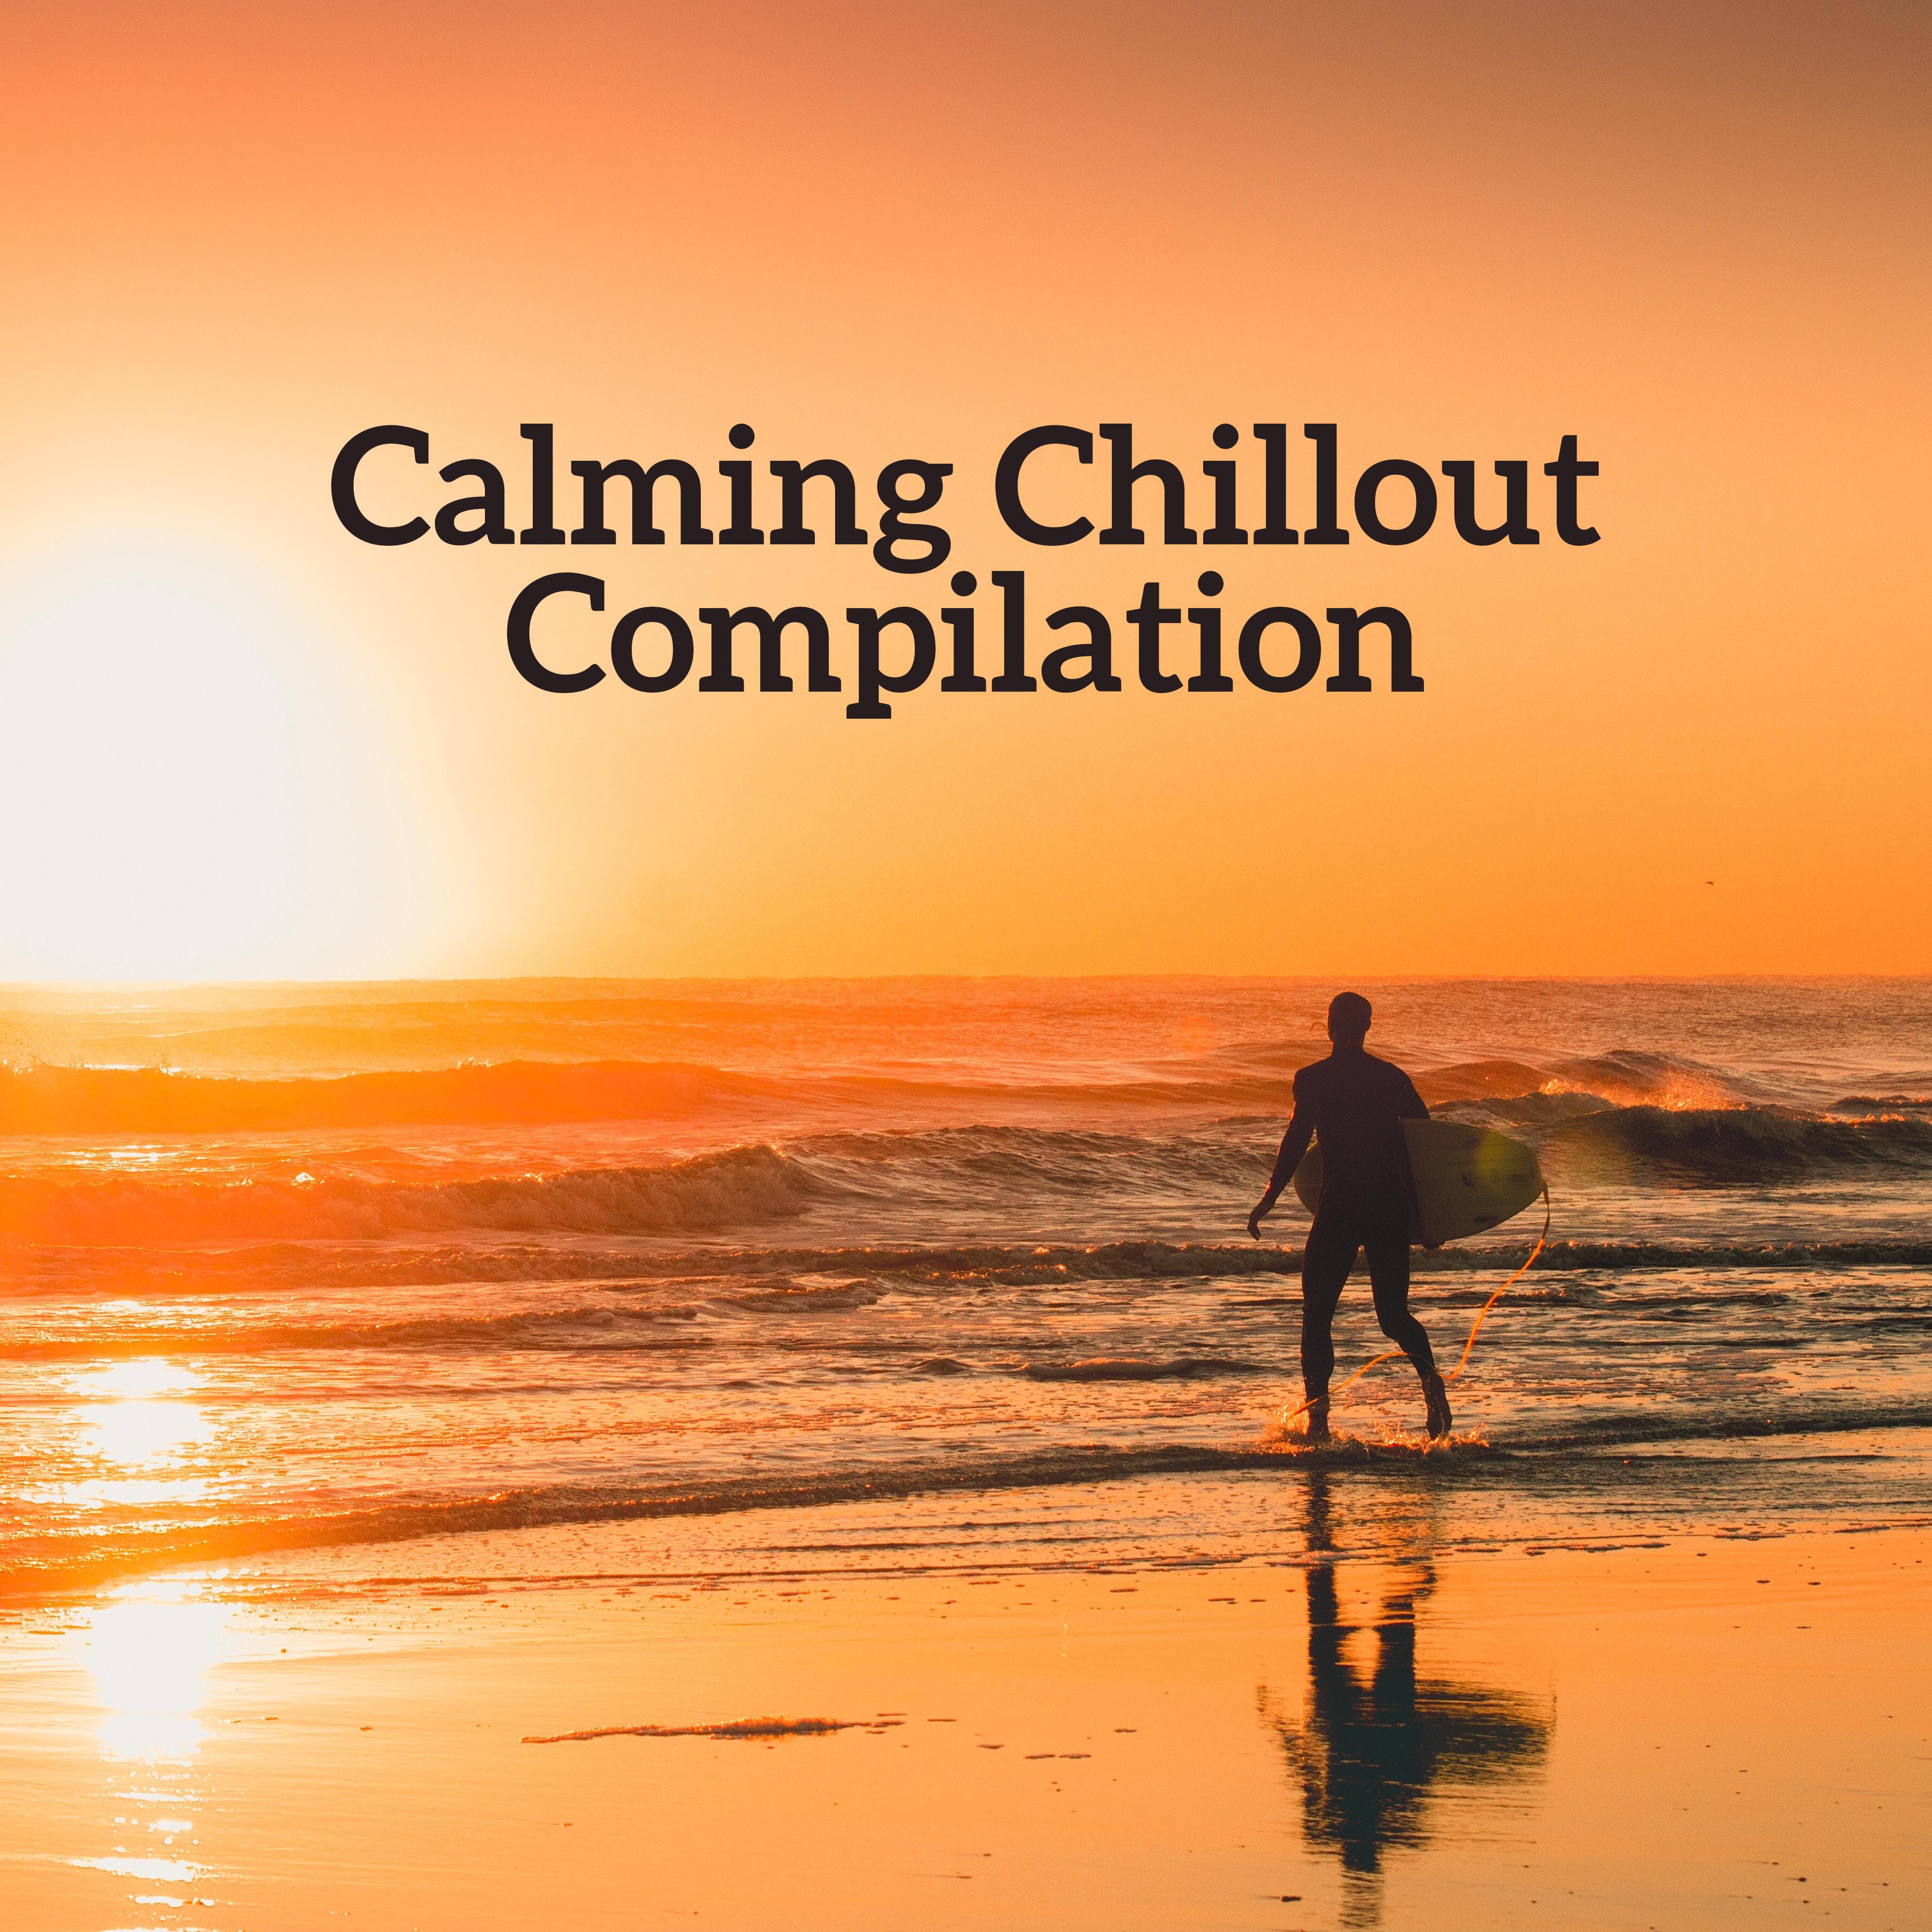 Calming Chillout Compilation: 2019 Fresh Soft Chill Out Music for Total Deep Relaxation in the Beach, Stress Relief, Destroy Bad Thoughts, Body & Mind Full Rest